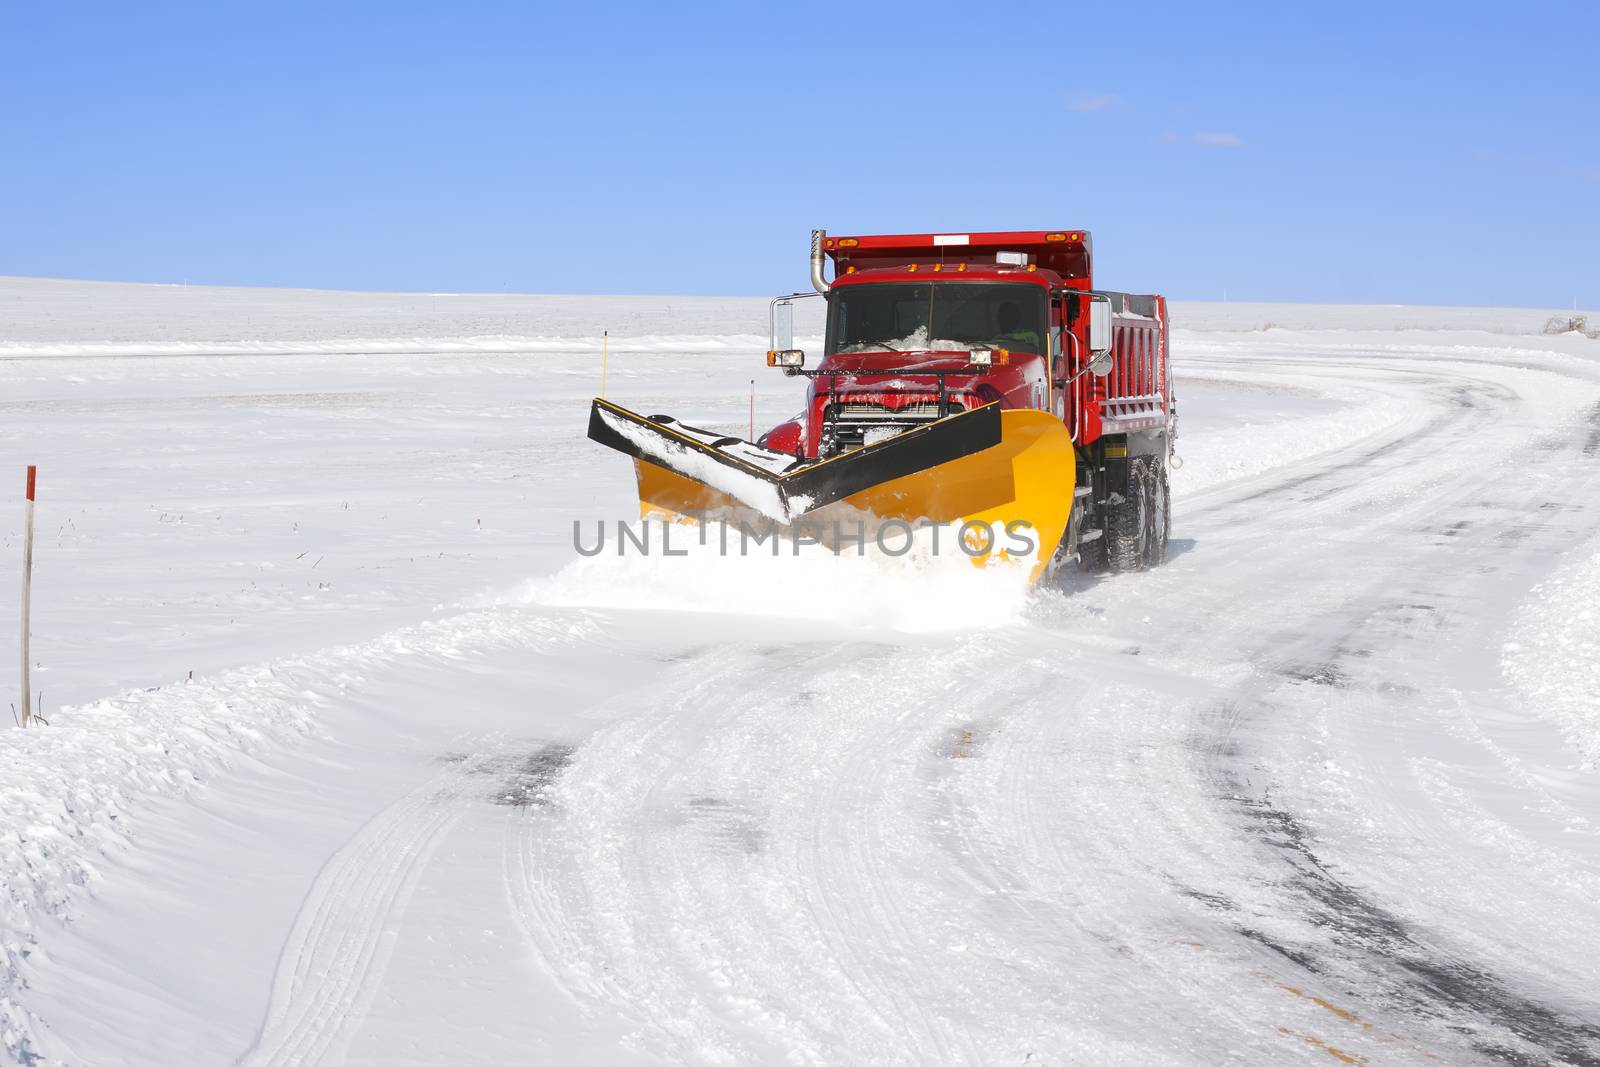 A snowplow truck removing snow from a winding rural road on bright winter day.